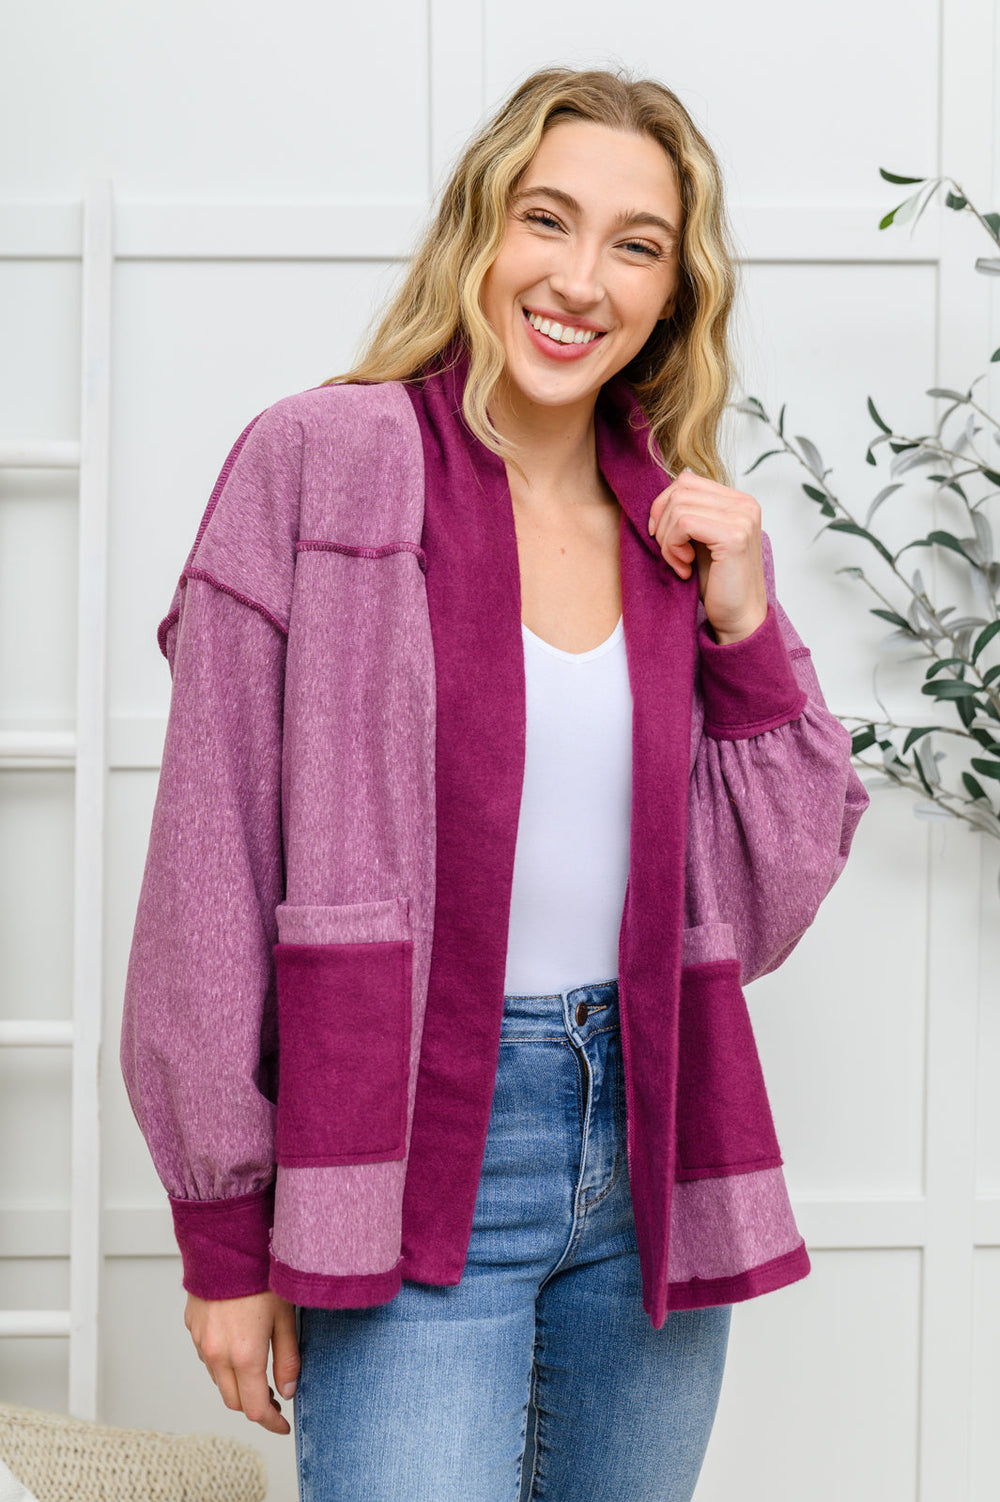 Two Hearts Jacket In Plum-Outerwear-Inspired by Justeen-Women's Clothing Boutique in Chicago, Illinois